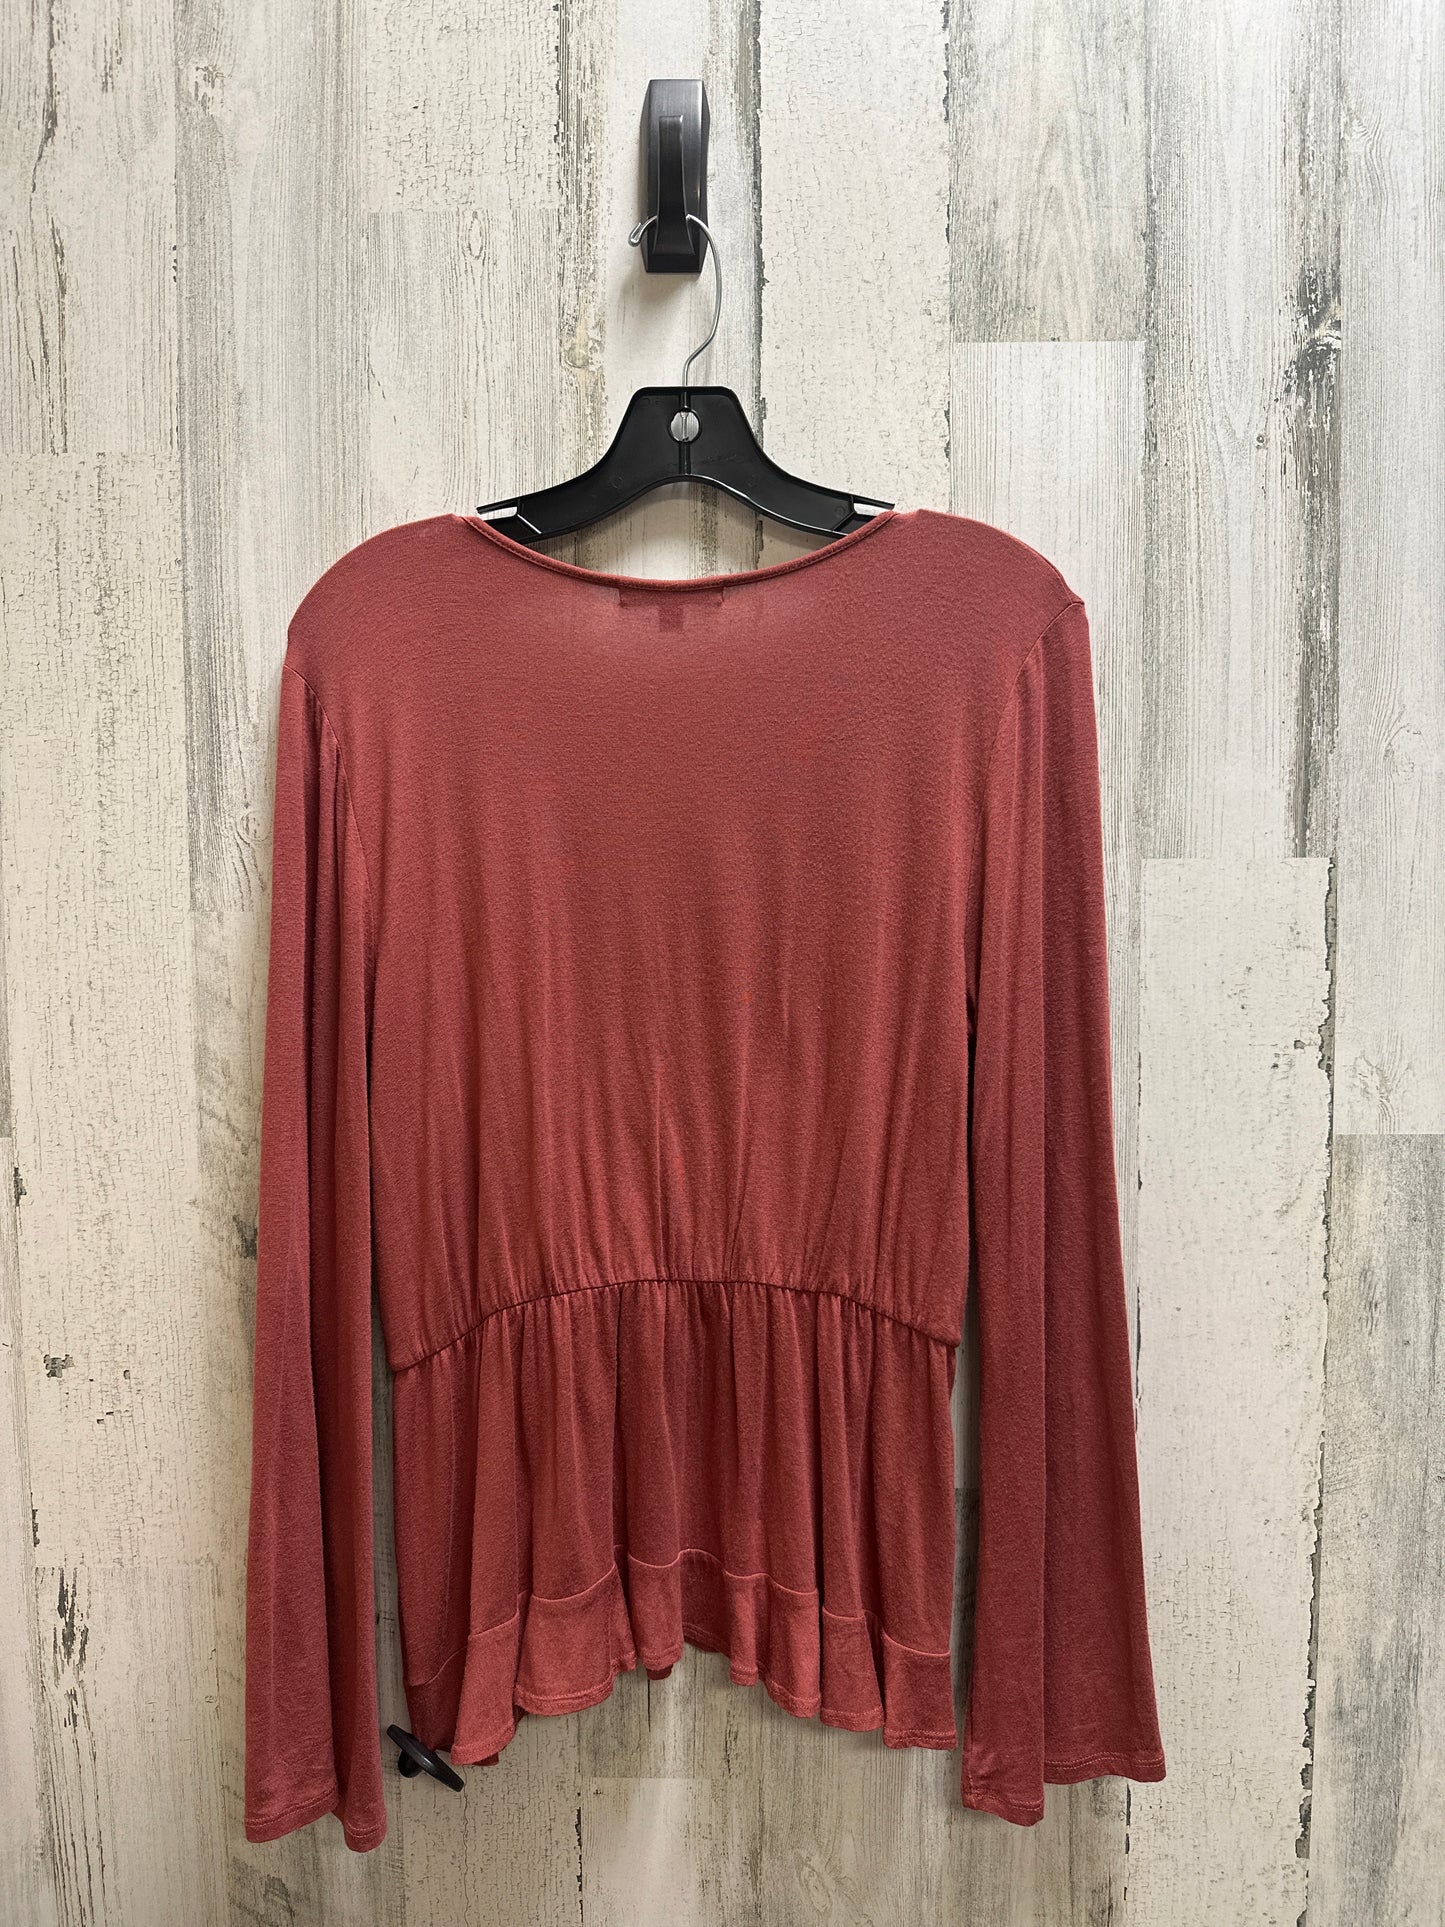 Top Long Sleeve By Moa Moa  Size: M